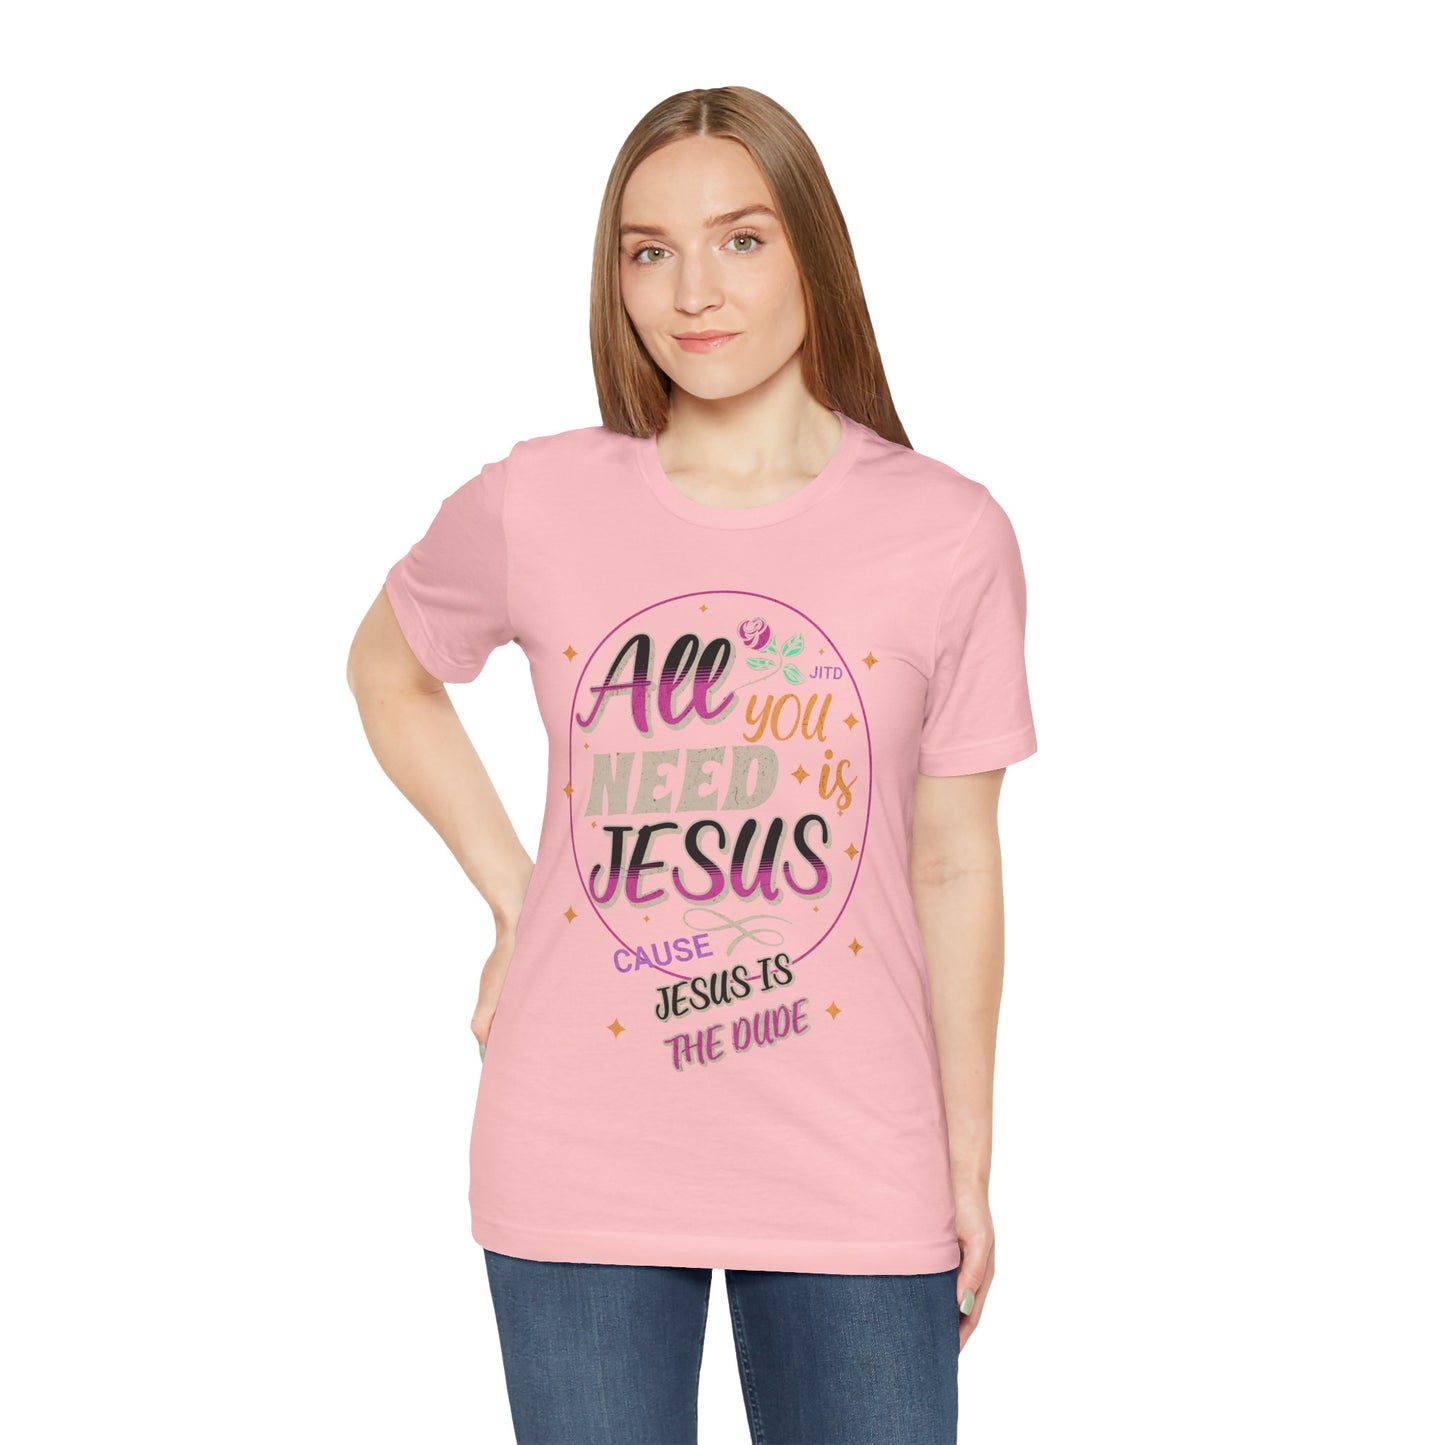 JESUS IS THE DUDE "ALL YOU NEED" TEE